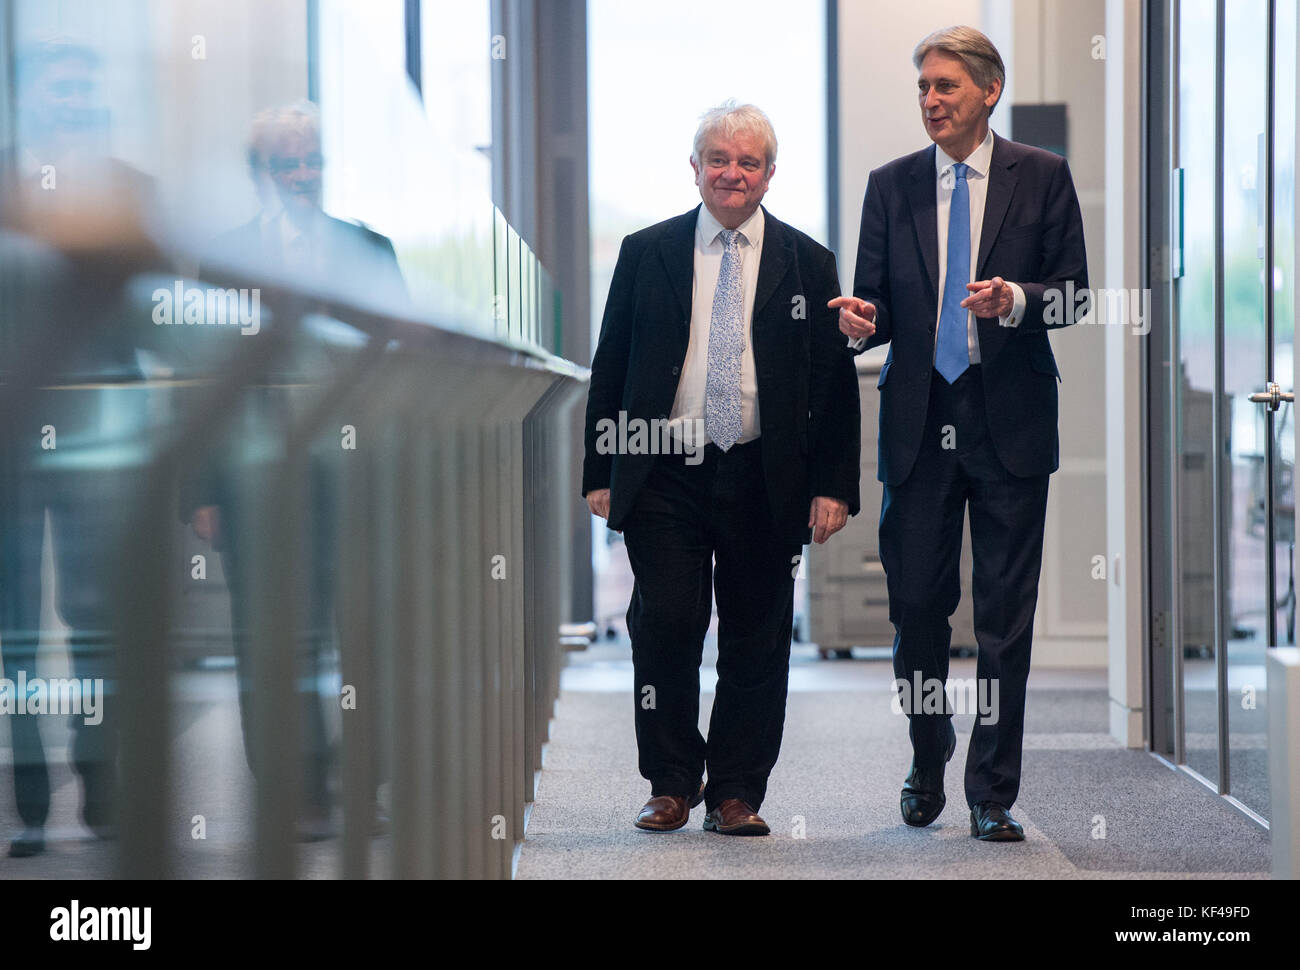 Chancellor Philip Hammond (right) walks with Director of The Francis Crick Institute, Paul Nurse, during his visit to the institute, in London, as the UK economy unexpectedly accelerated in the third quarter, upping the pressure on the Bank of England to hike interest rates next month. Stock Photo